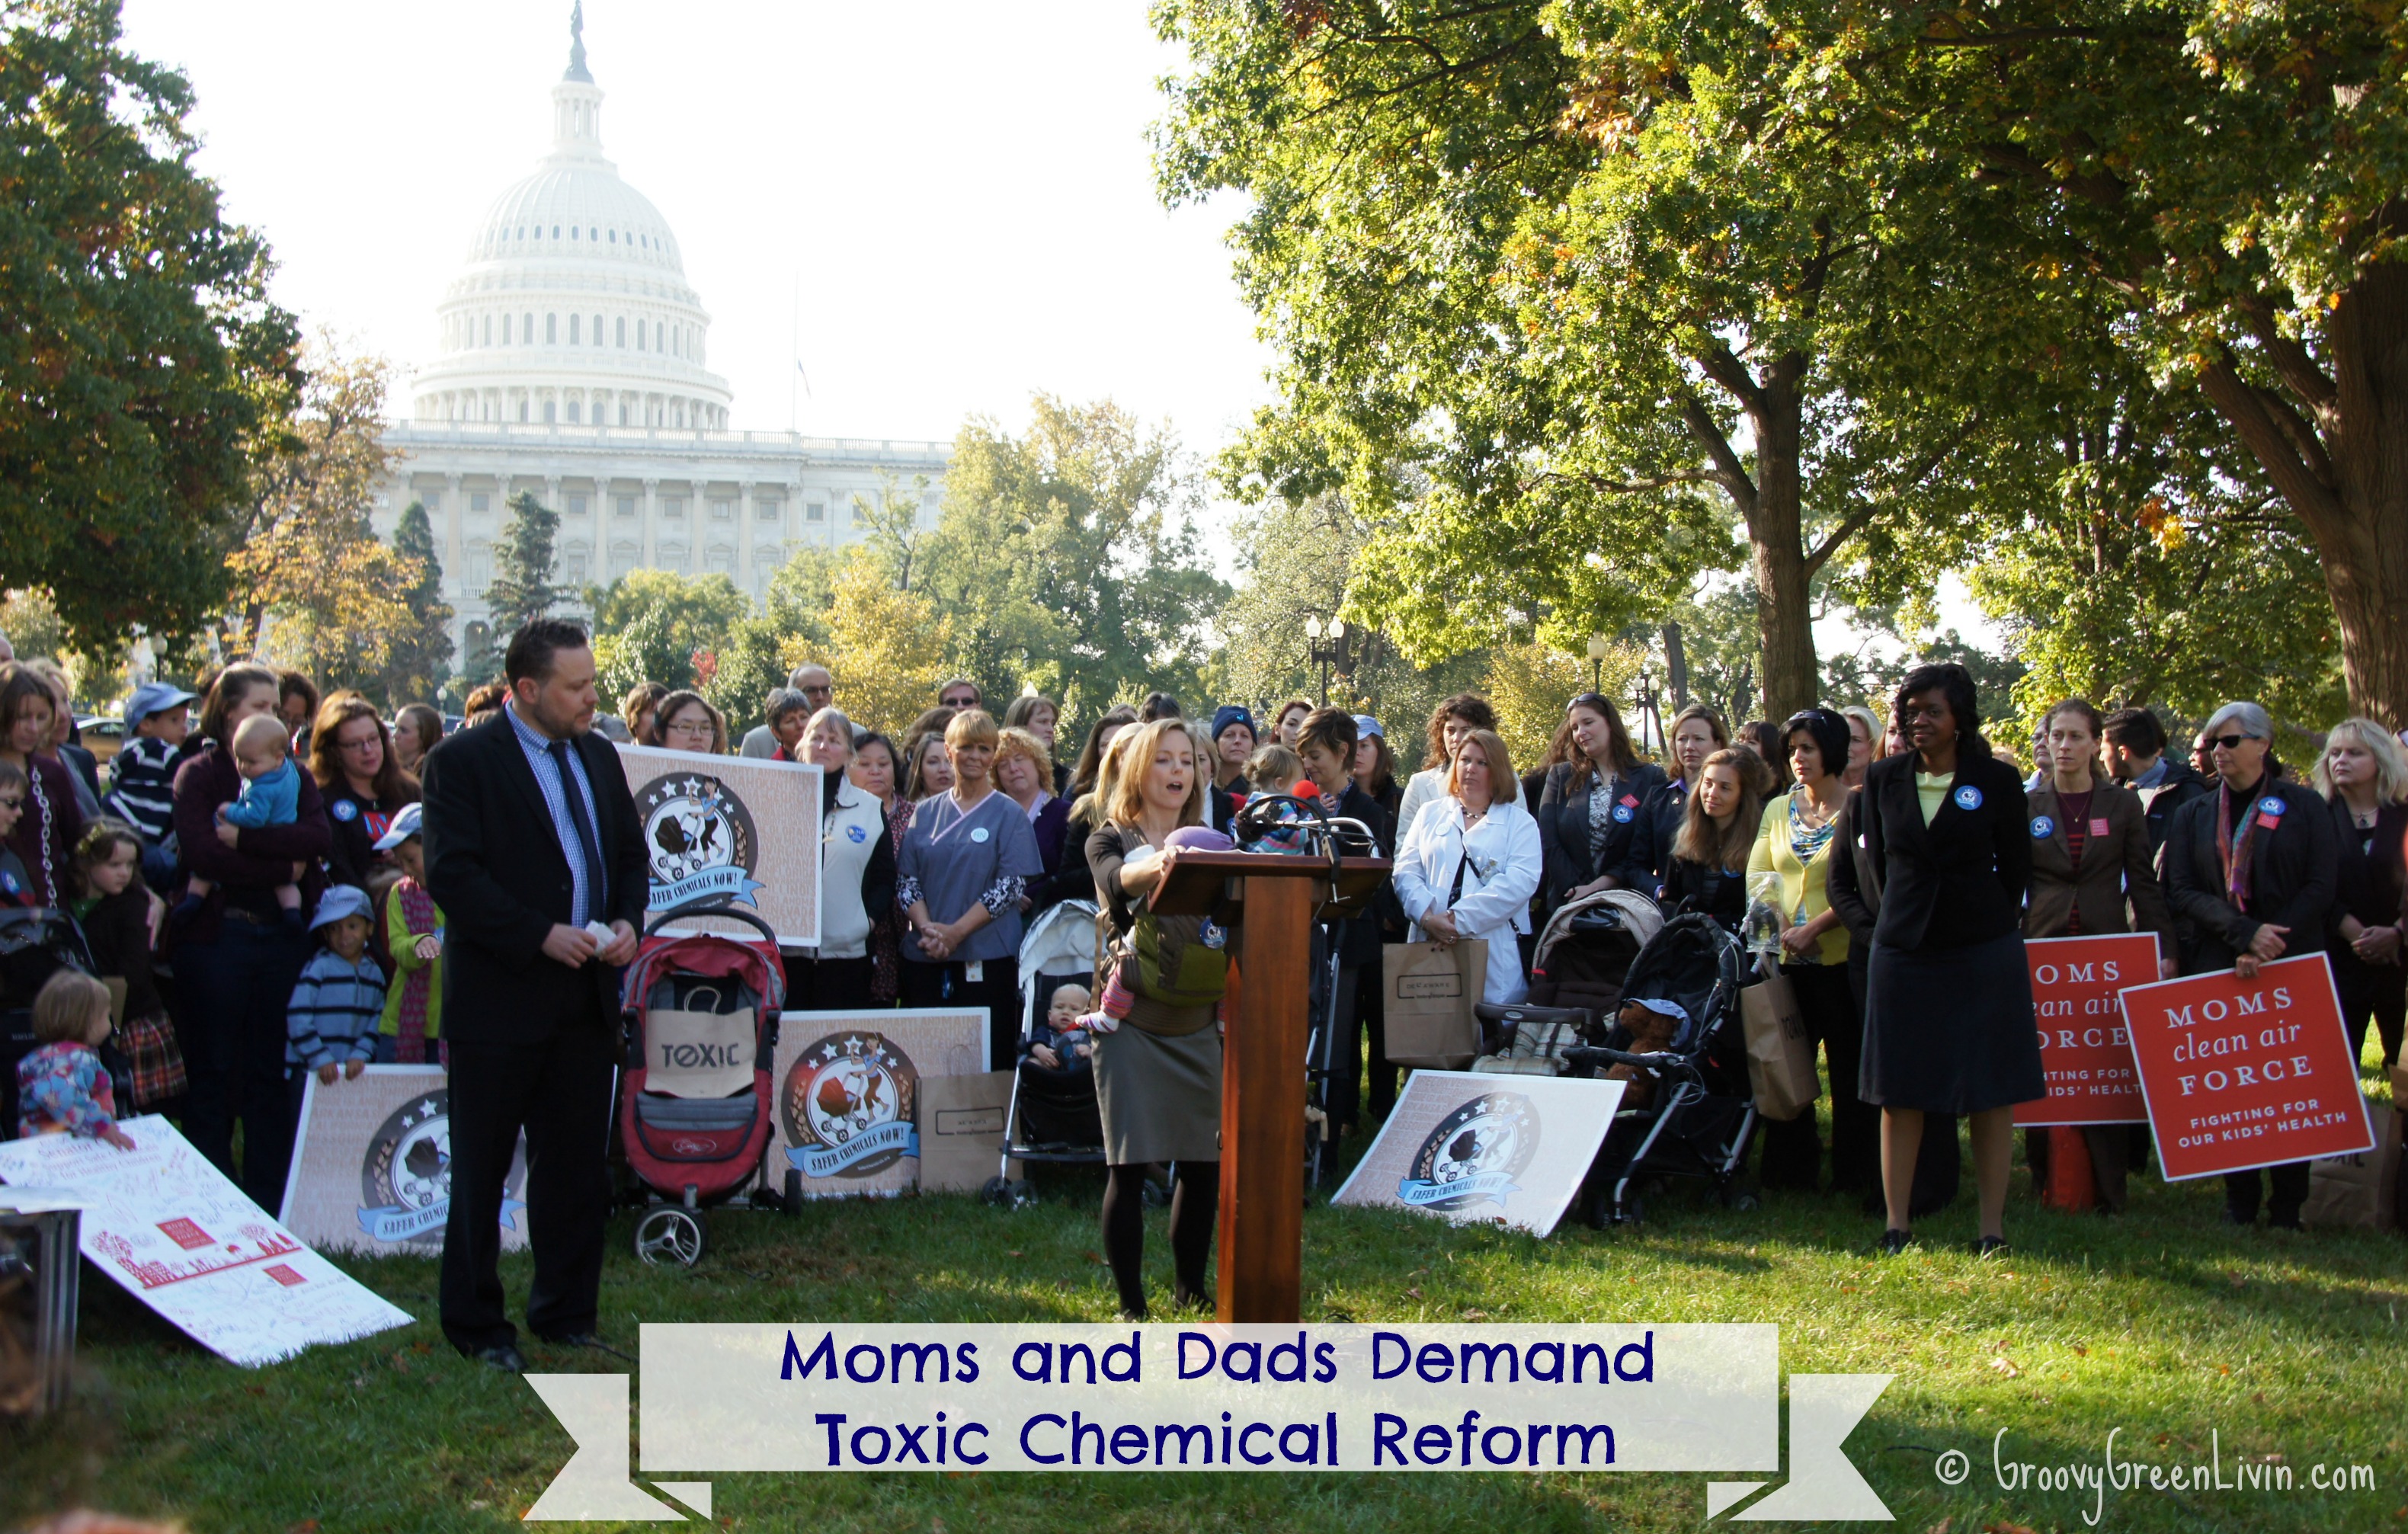 Groovy Green Livin Moms and Dads Demand Toxic Chemical Reform